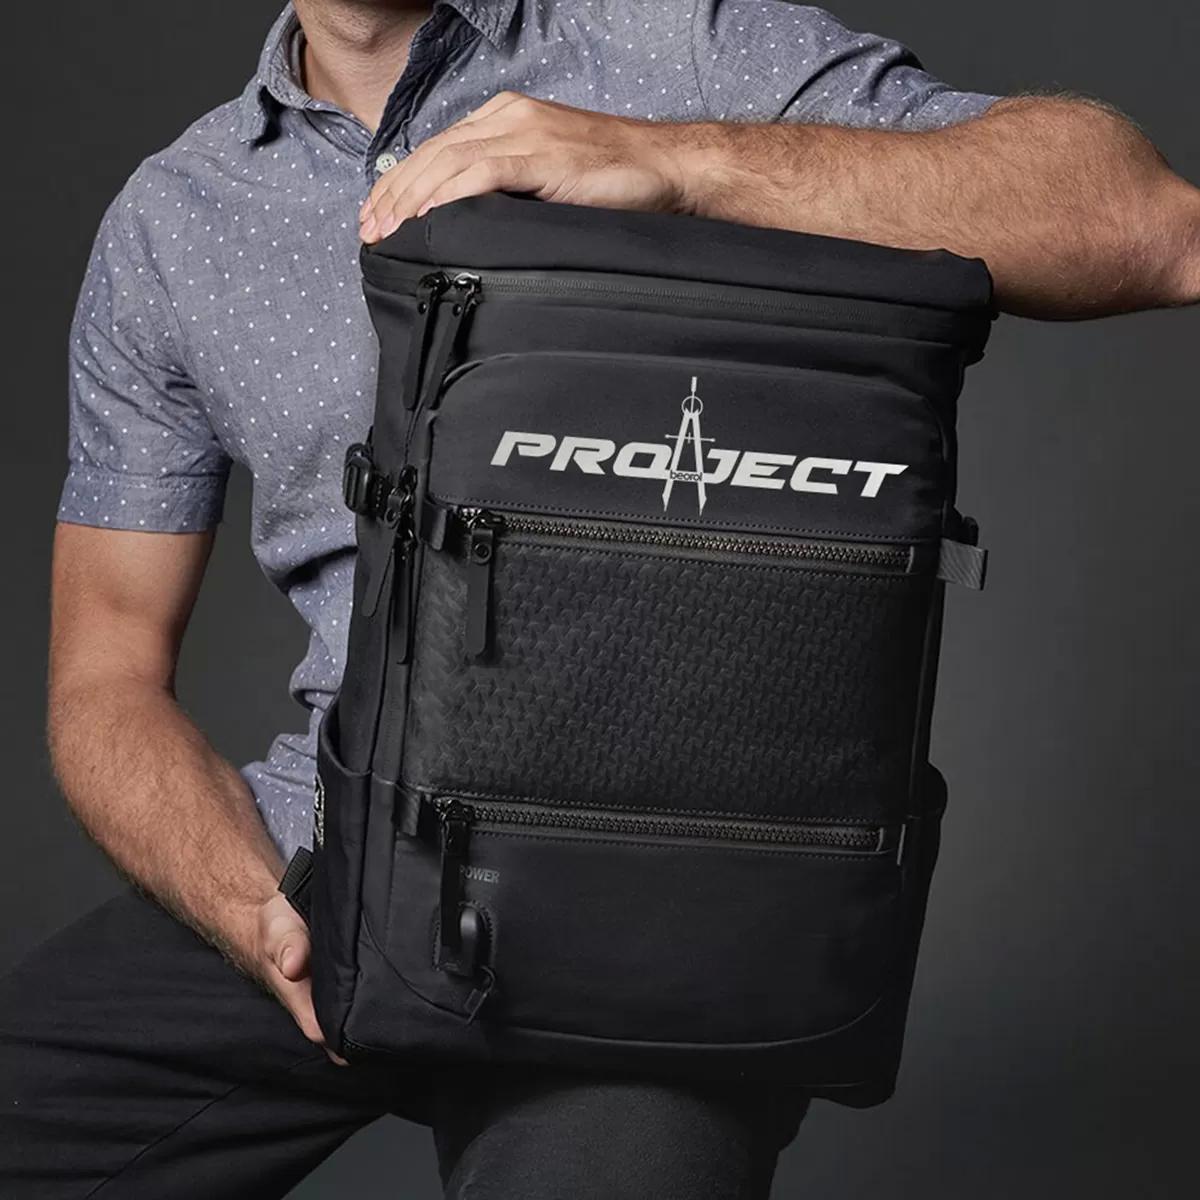 PROJECT business travel backpack 